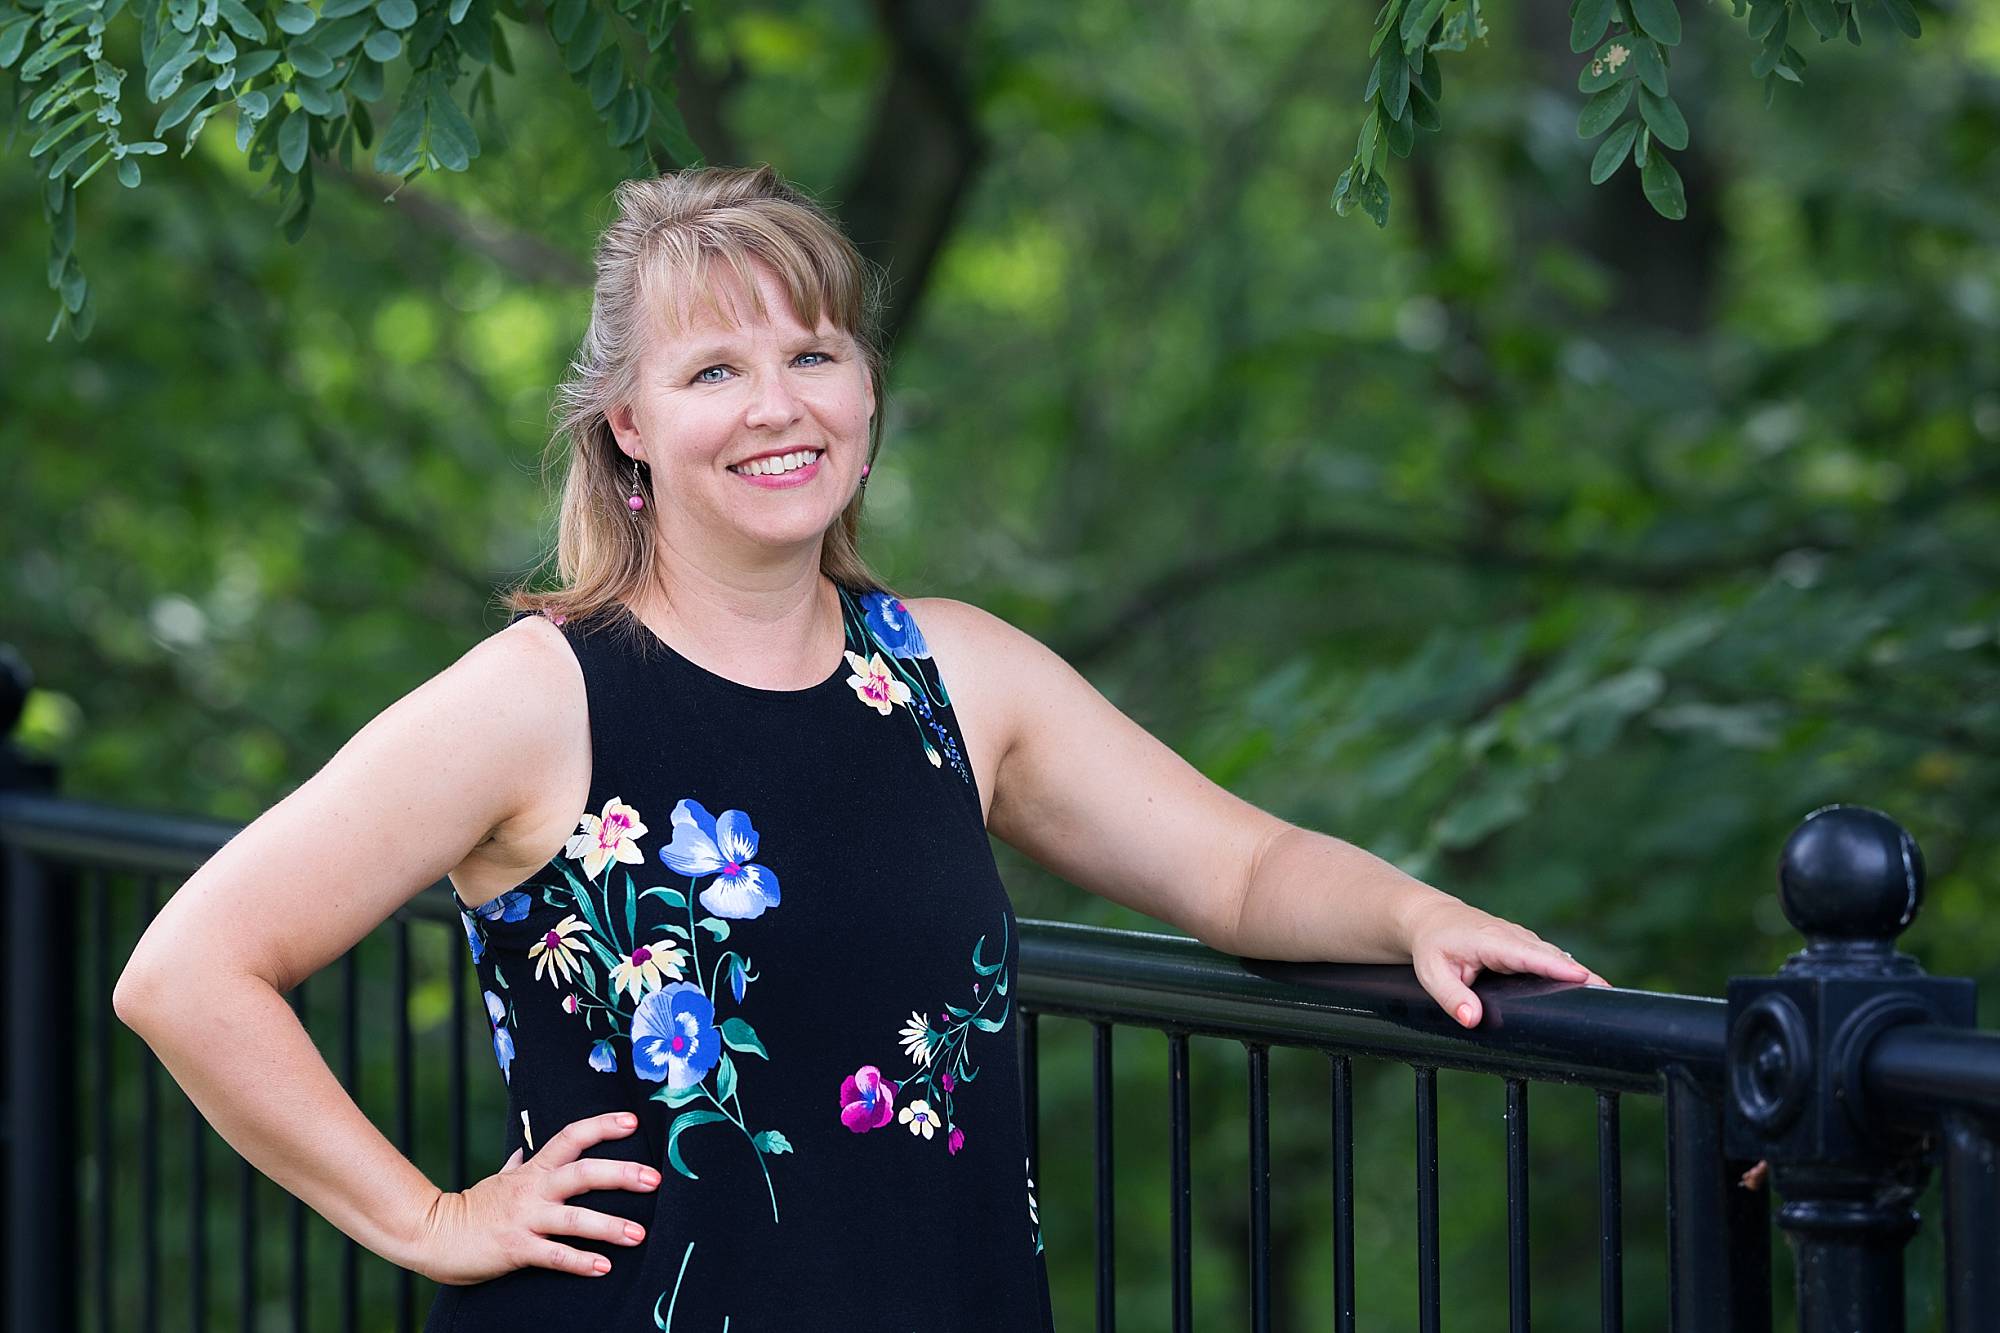 image of Theresa Grosh, designer and owner of Naptime Inspirations where she creates handmade accessories. She's a blonde woman wearing a navy sleeveless, flowered dress.